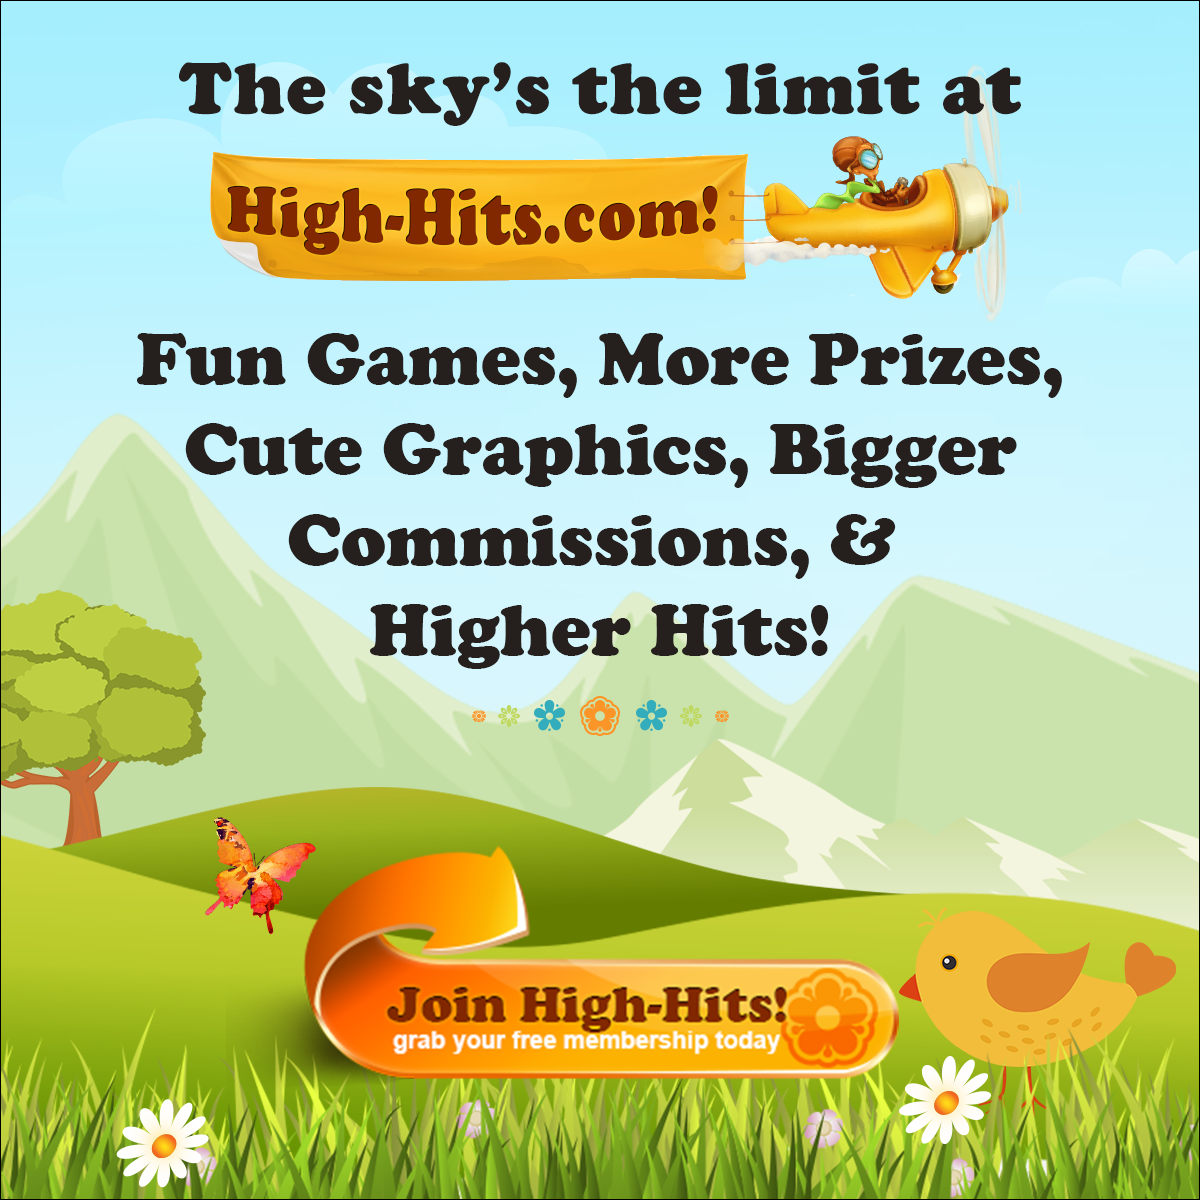 Join High-Hits TODAY!